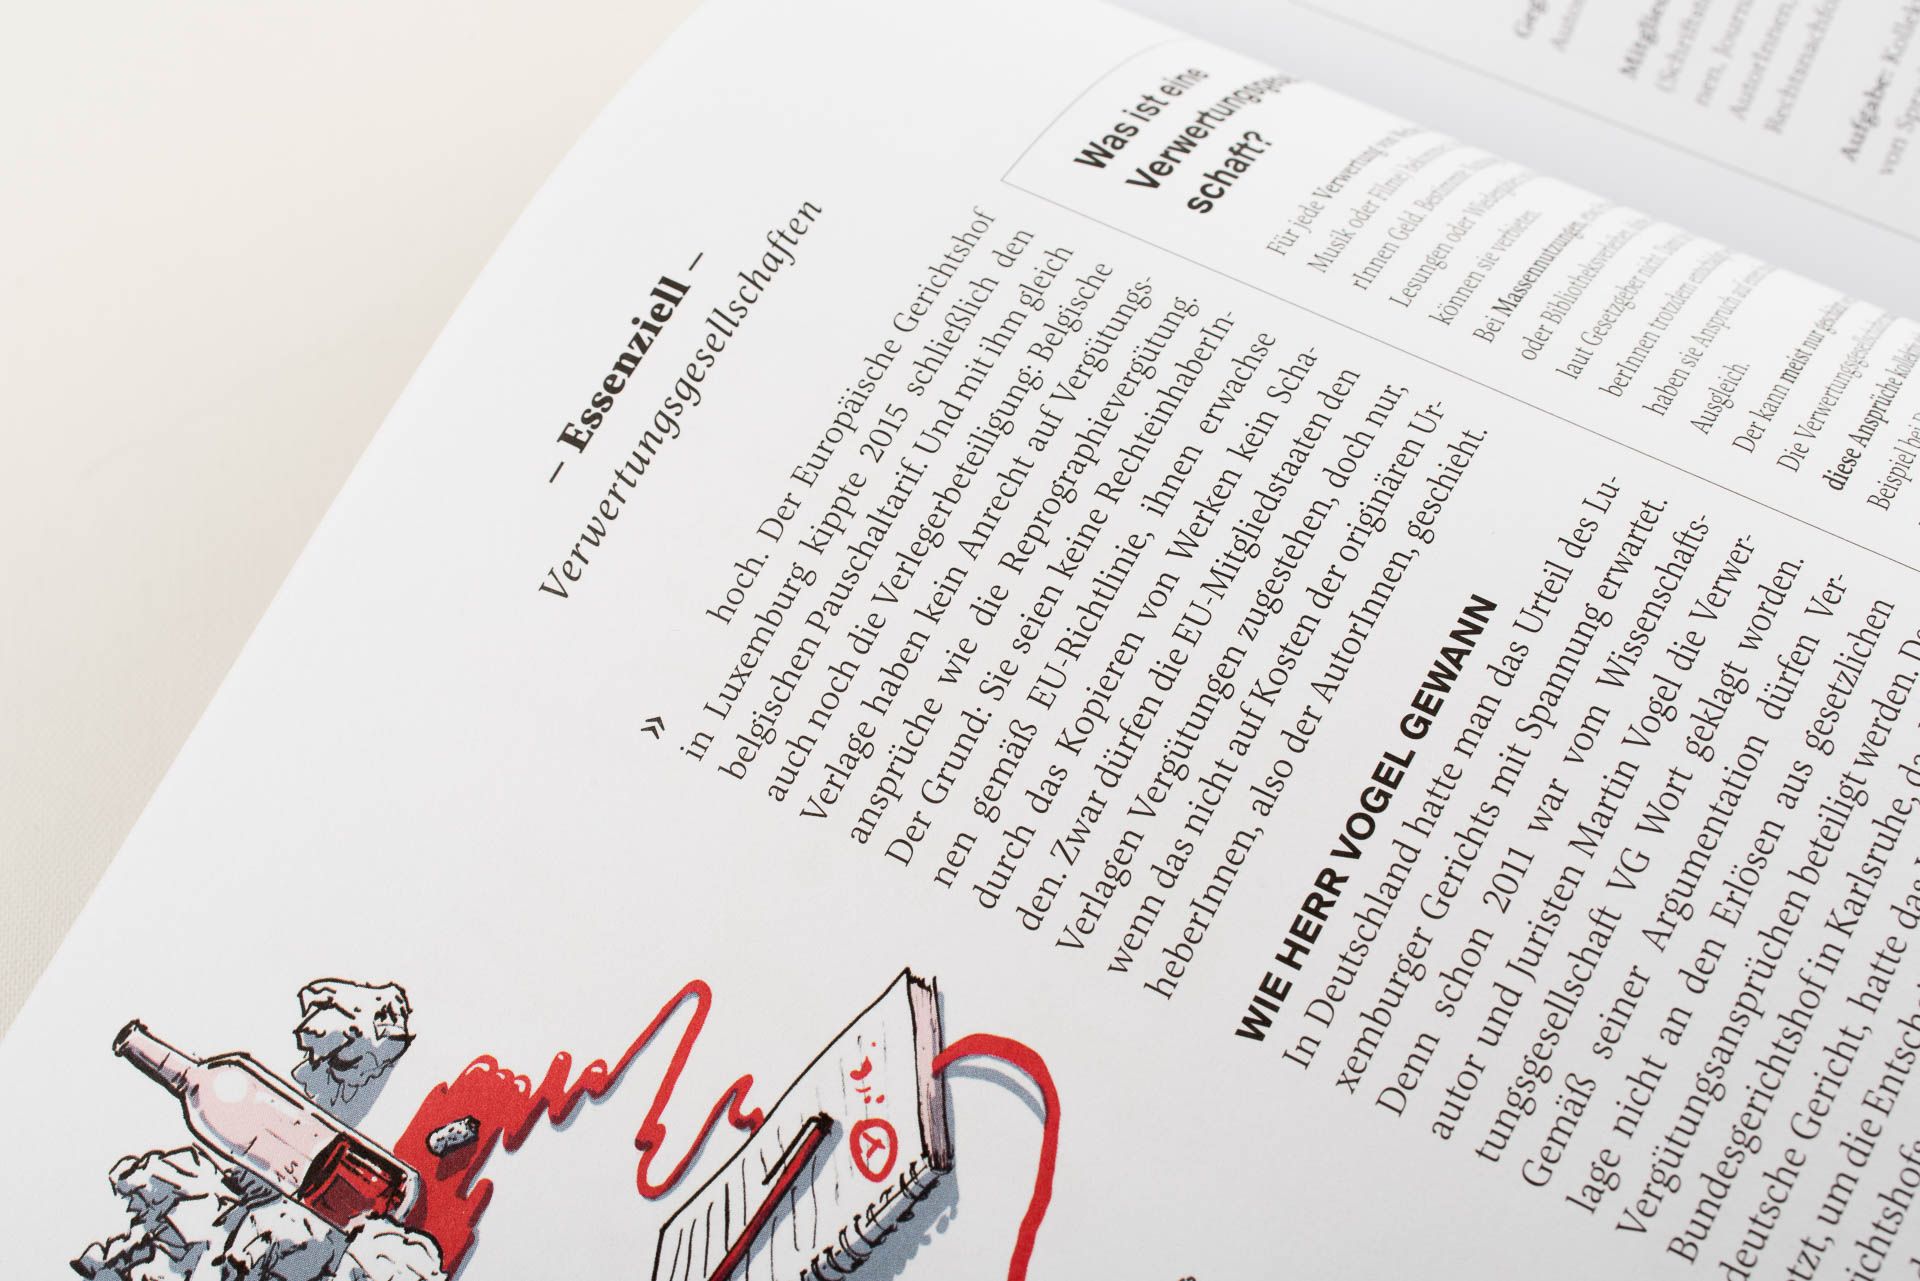 Anzeiger Magazin Font in use Liber Type Foundry